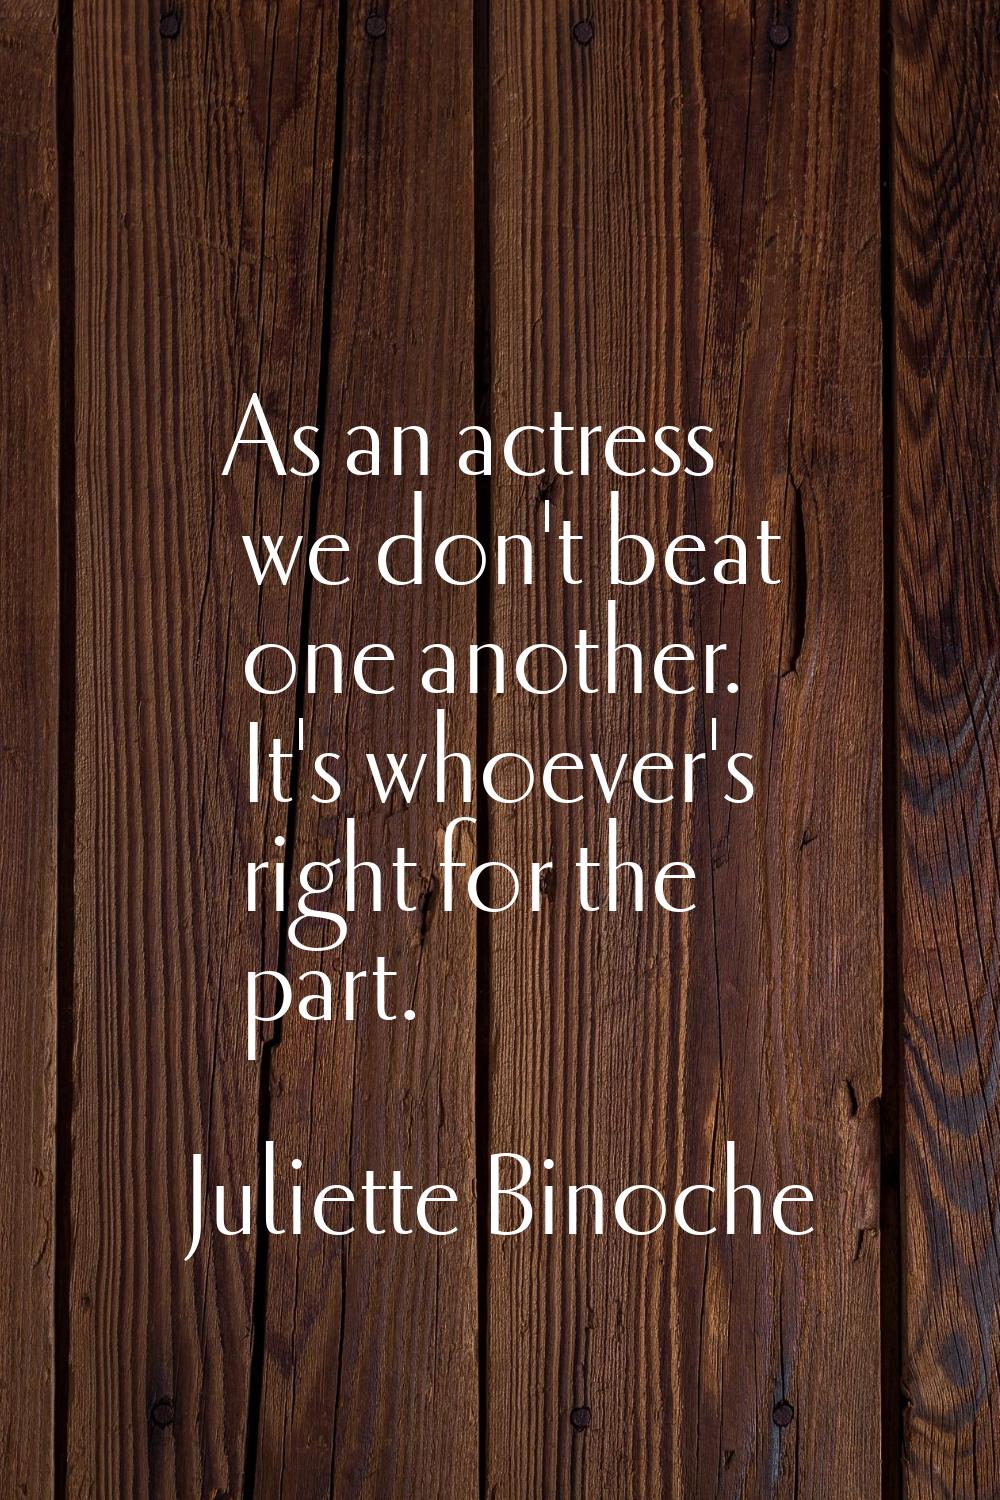 As an actress we don't beat one another. It's whoever's right for the part.